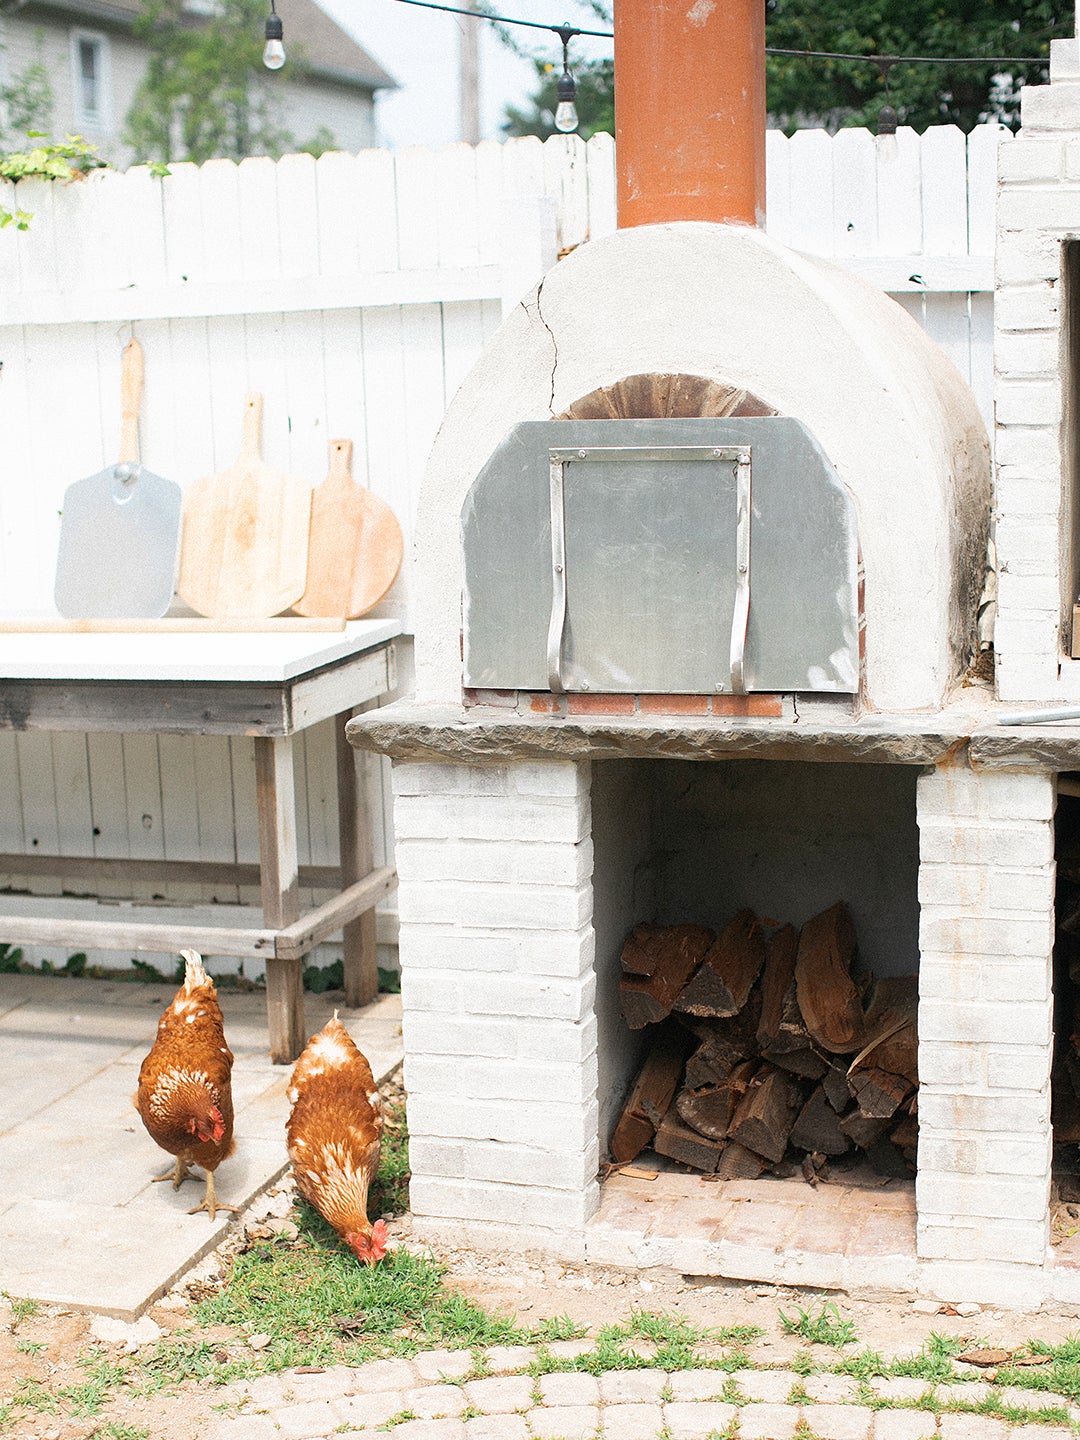 chickens next to oven